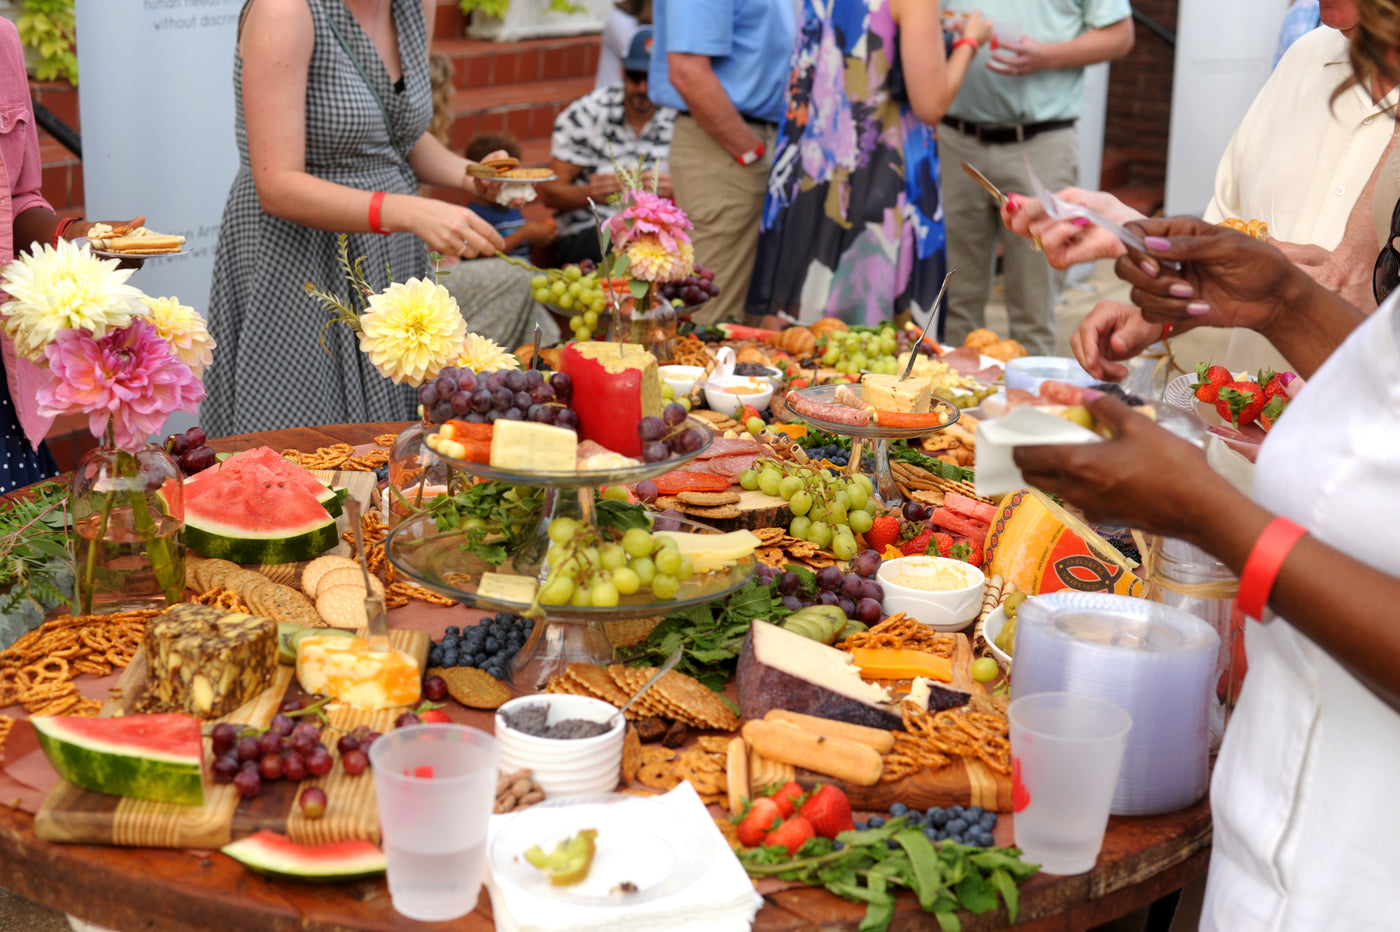 Why A Grazing Table for Your Event